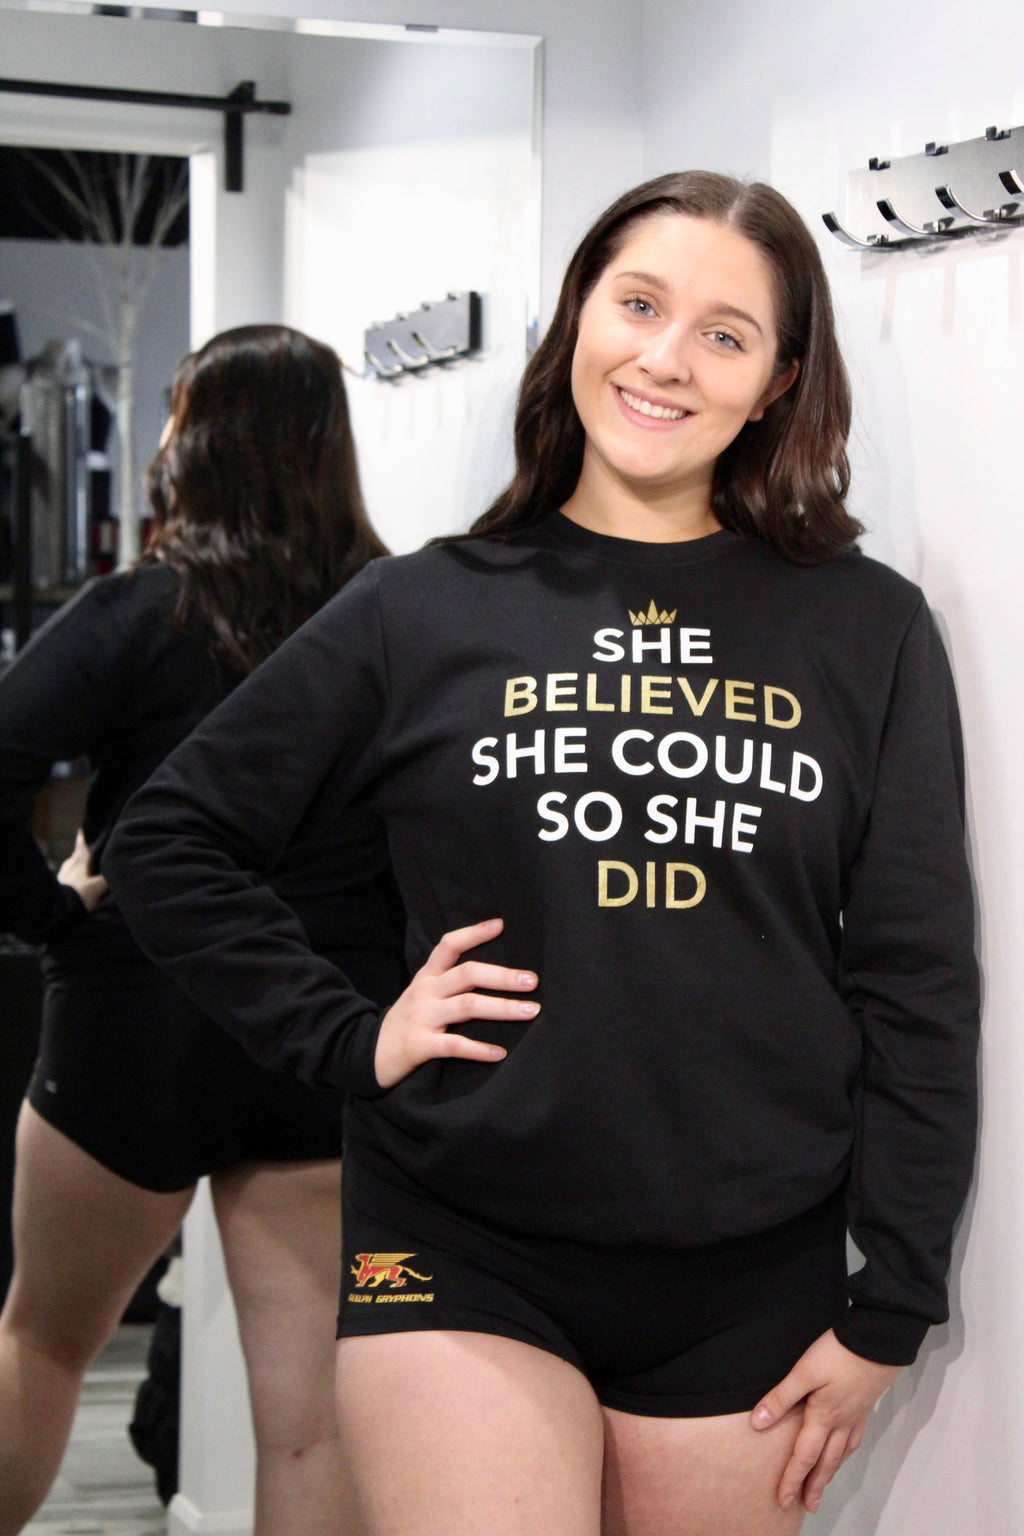 SGG - "She Believed She Could" Crewneck ADULT